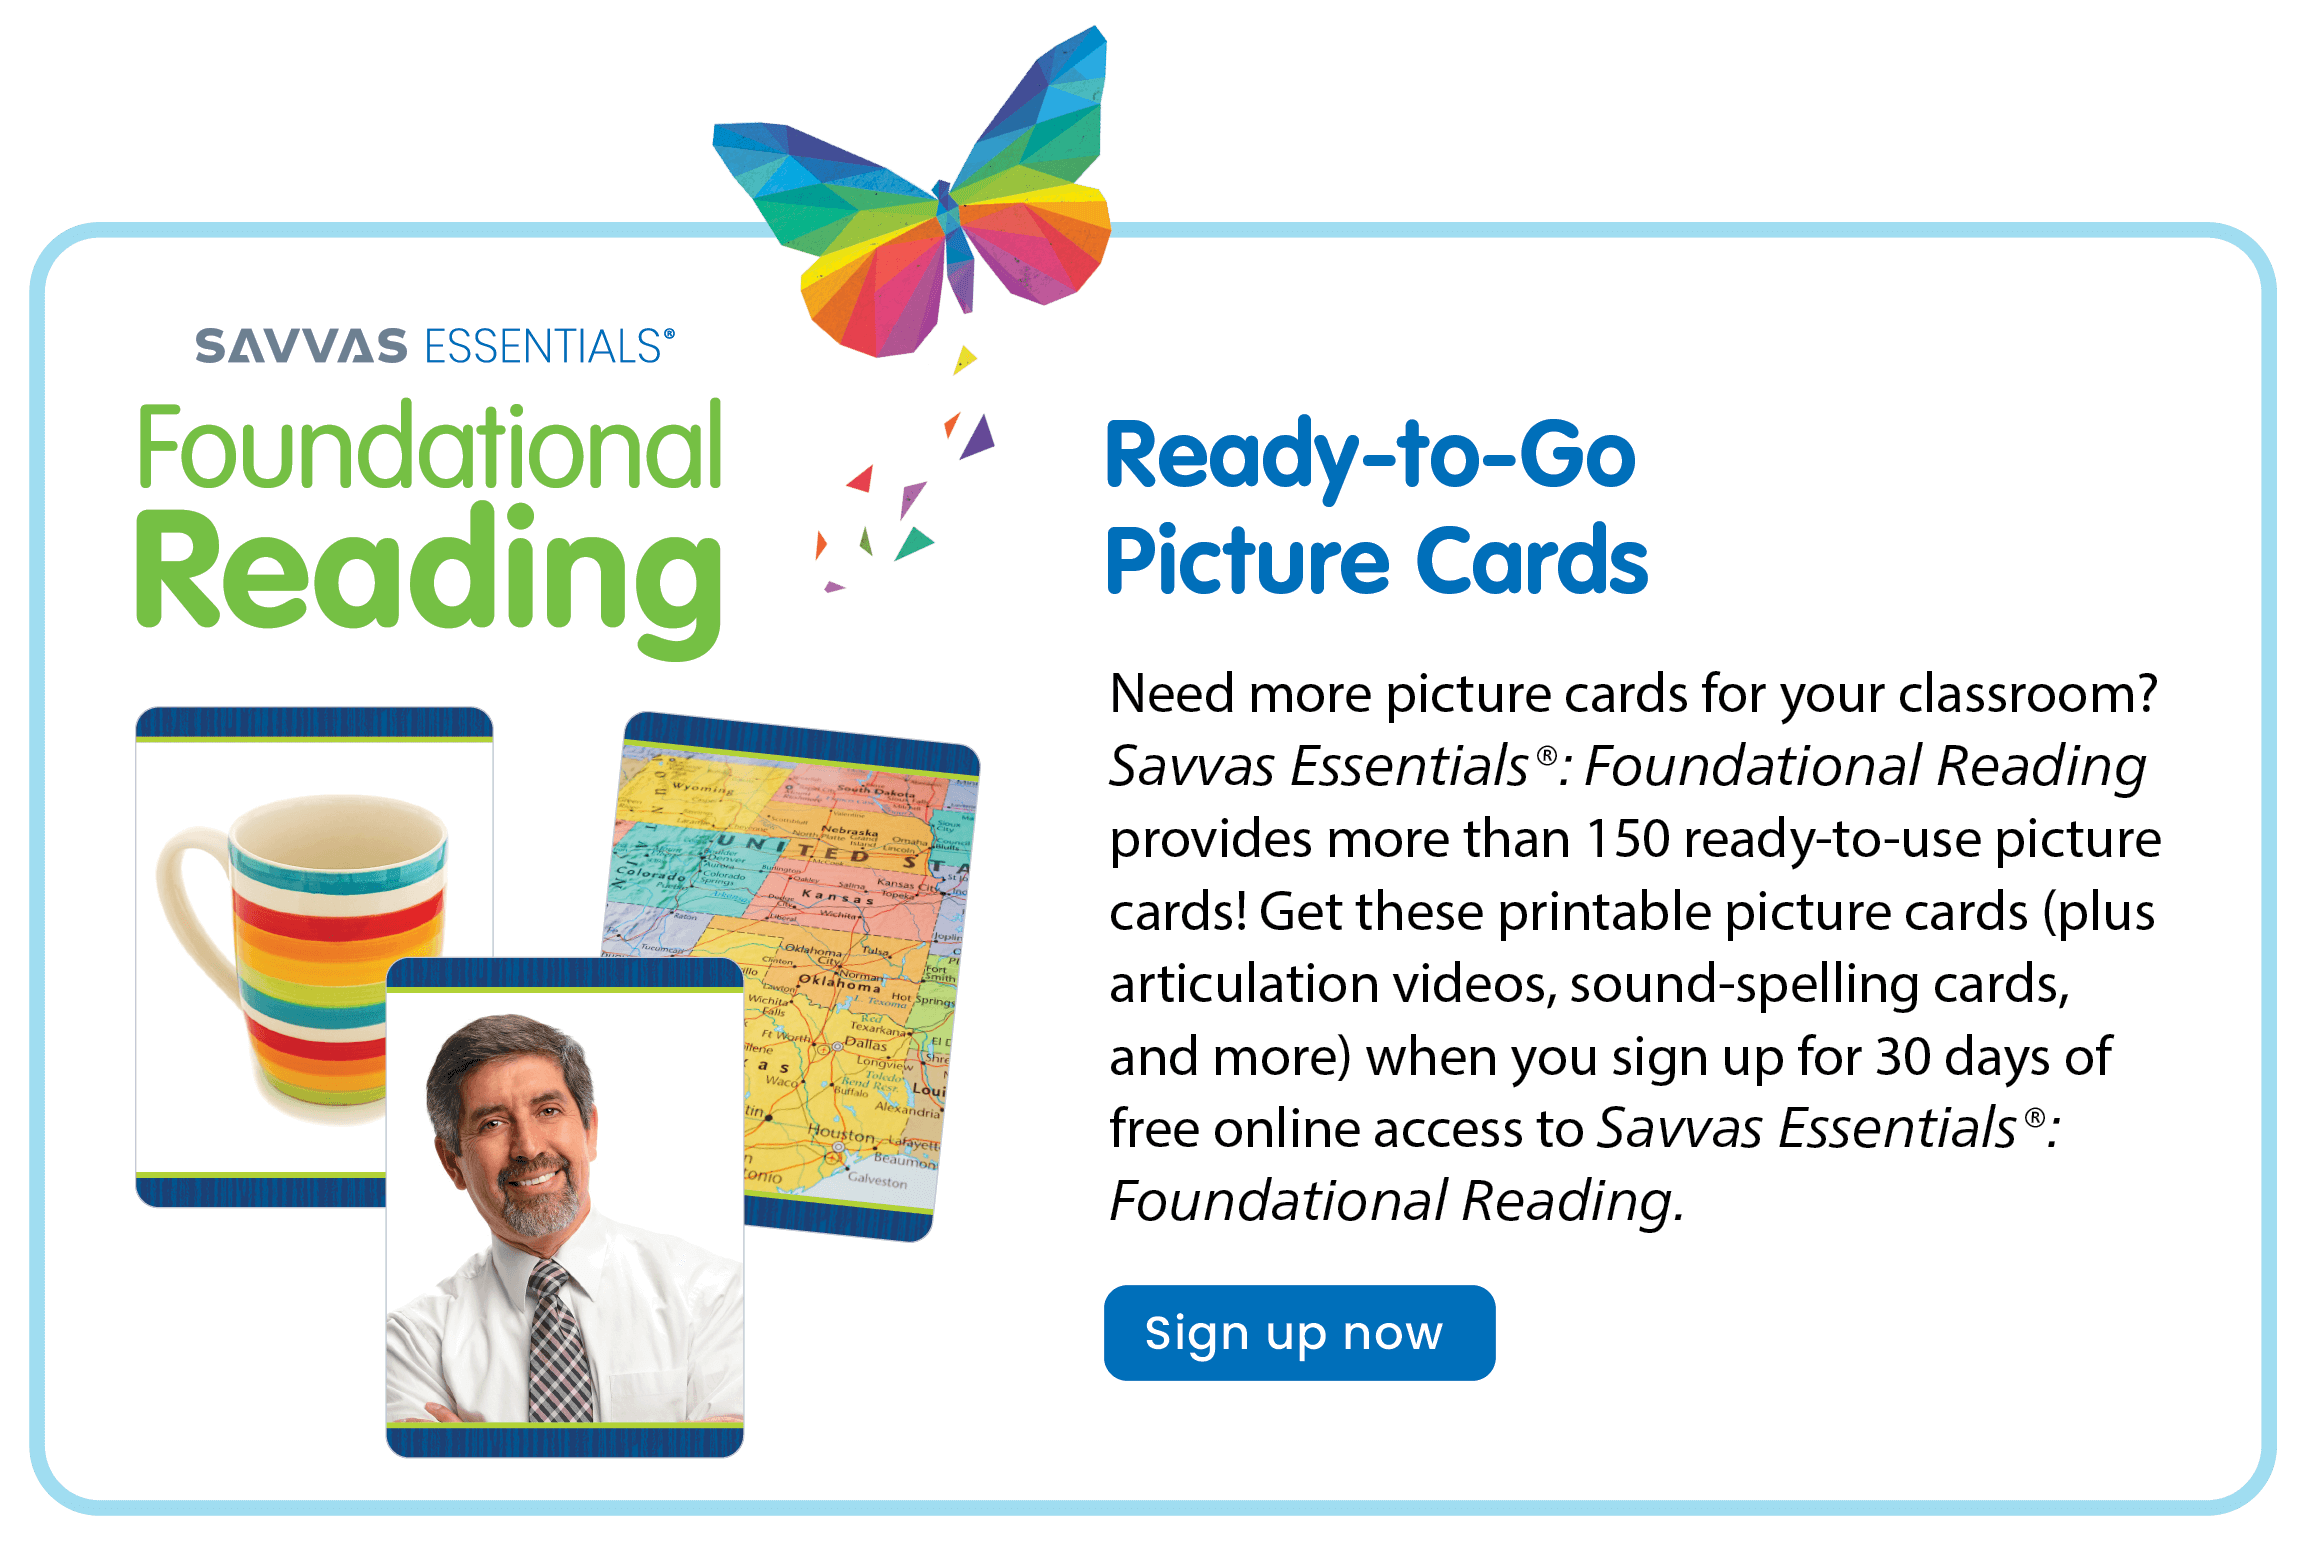 Example picture cards from Savvas Essentials: Foundational Reading to use for phonological awareness practice. Link to sign up for a free trial.